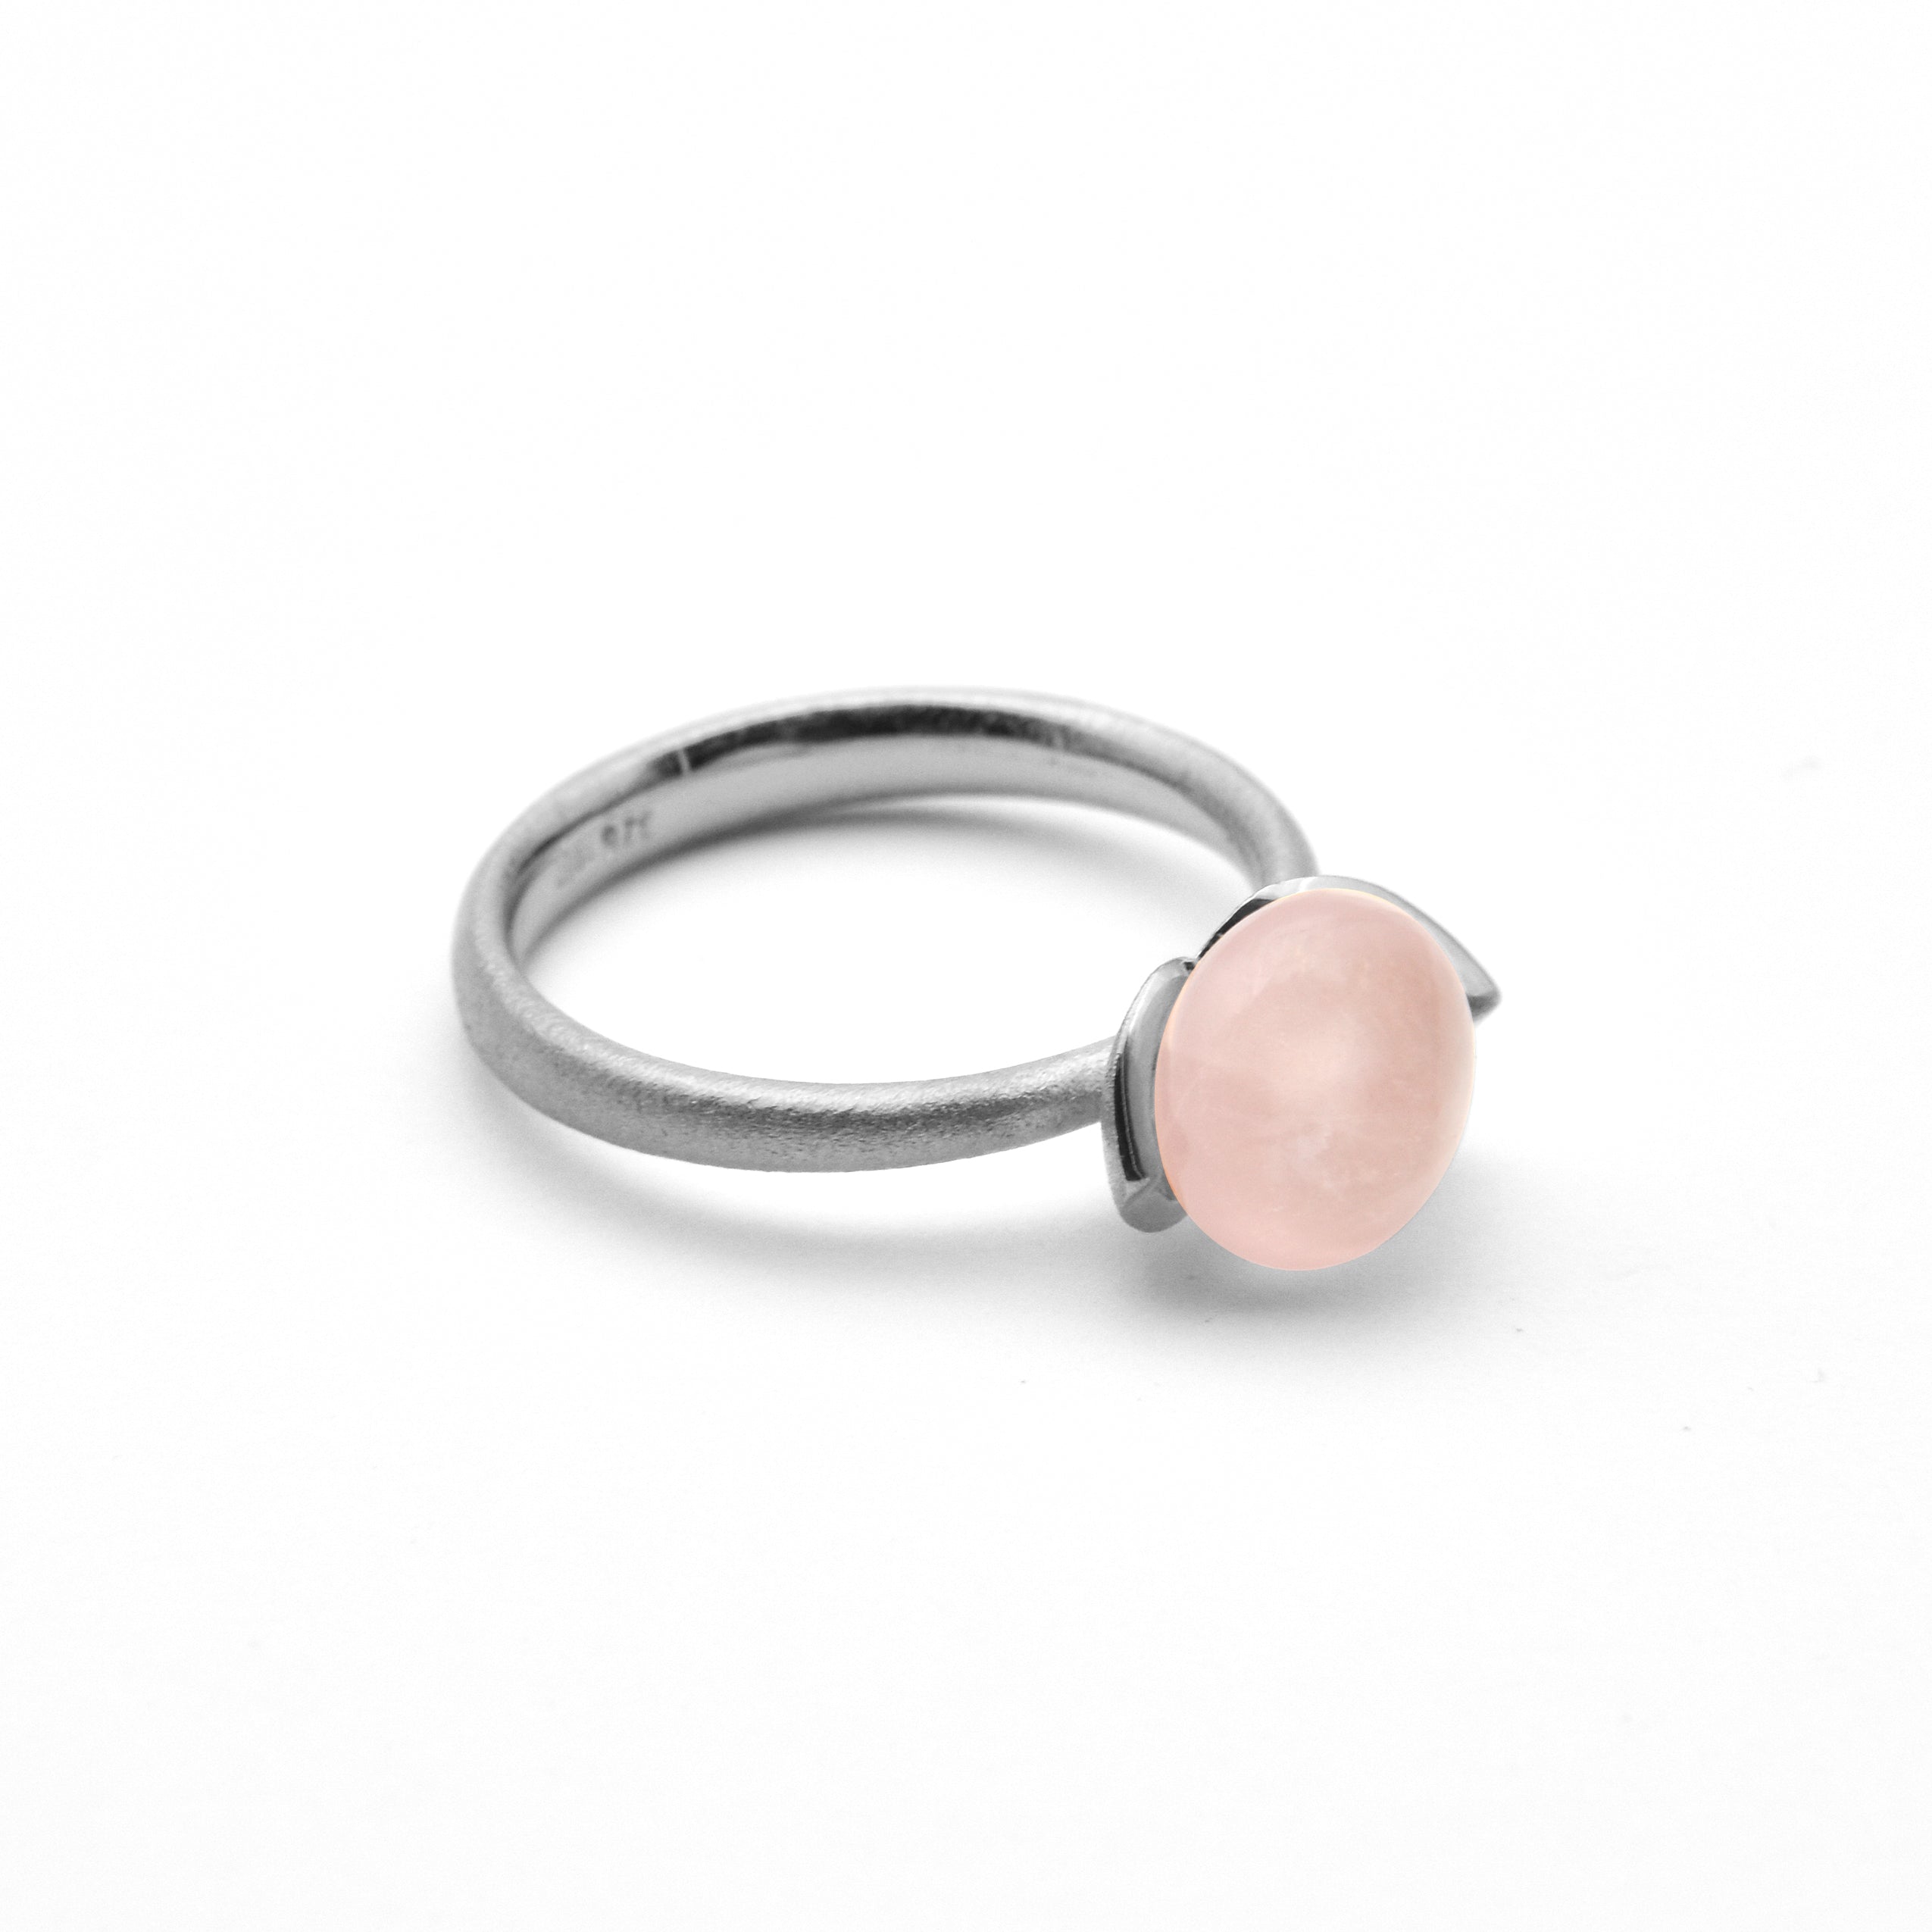 Dolce ring "smal" with rose quartz 925/-